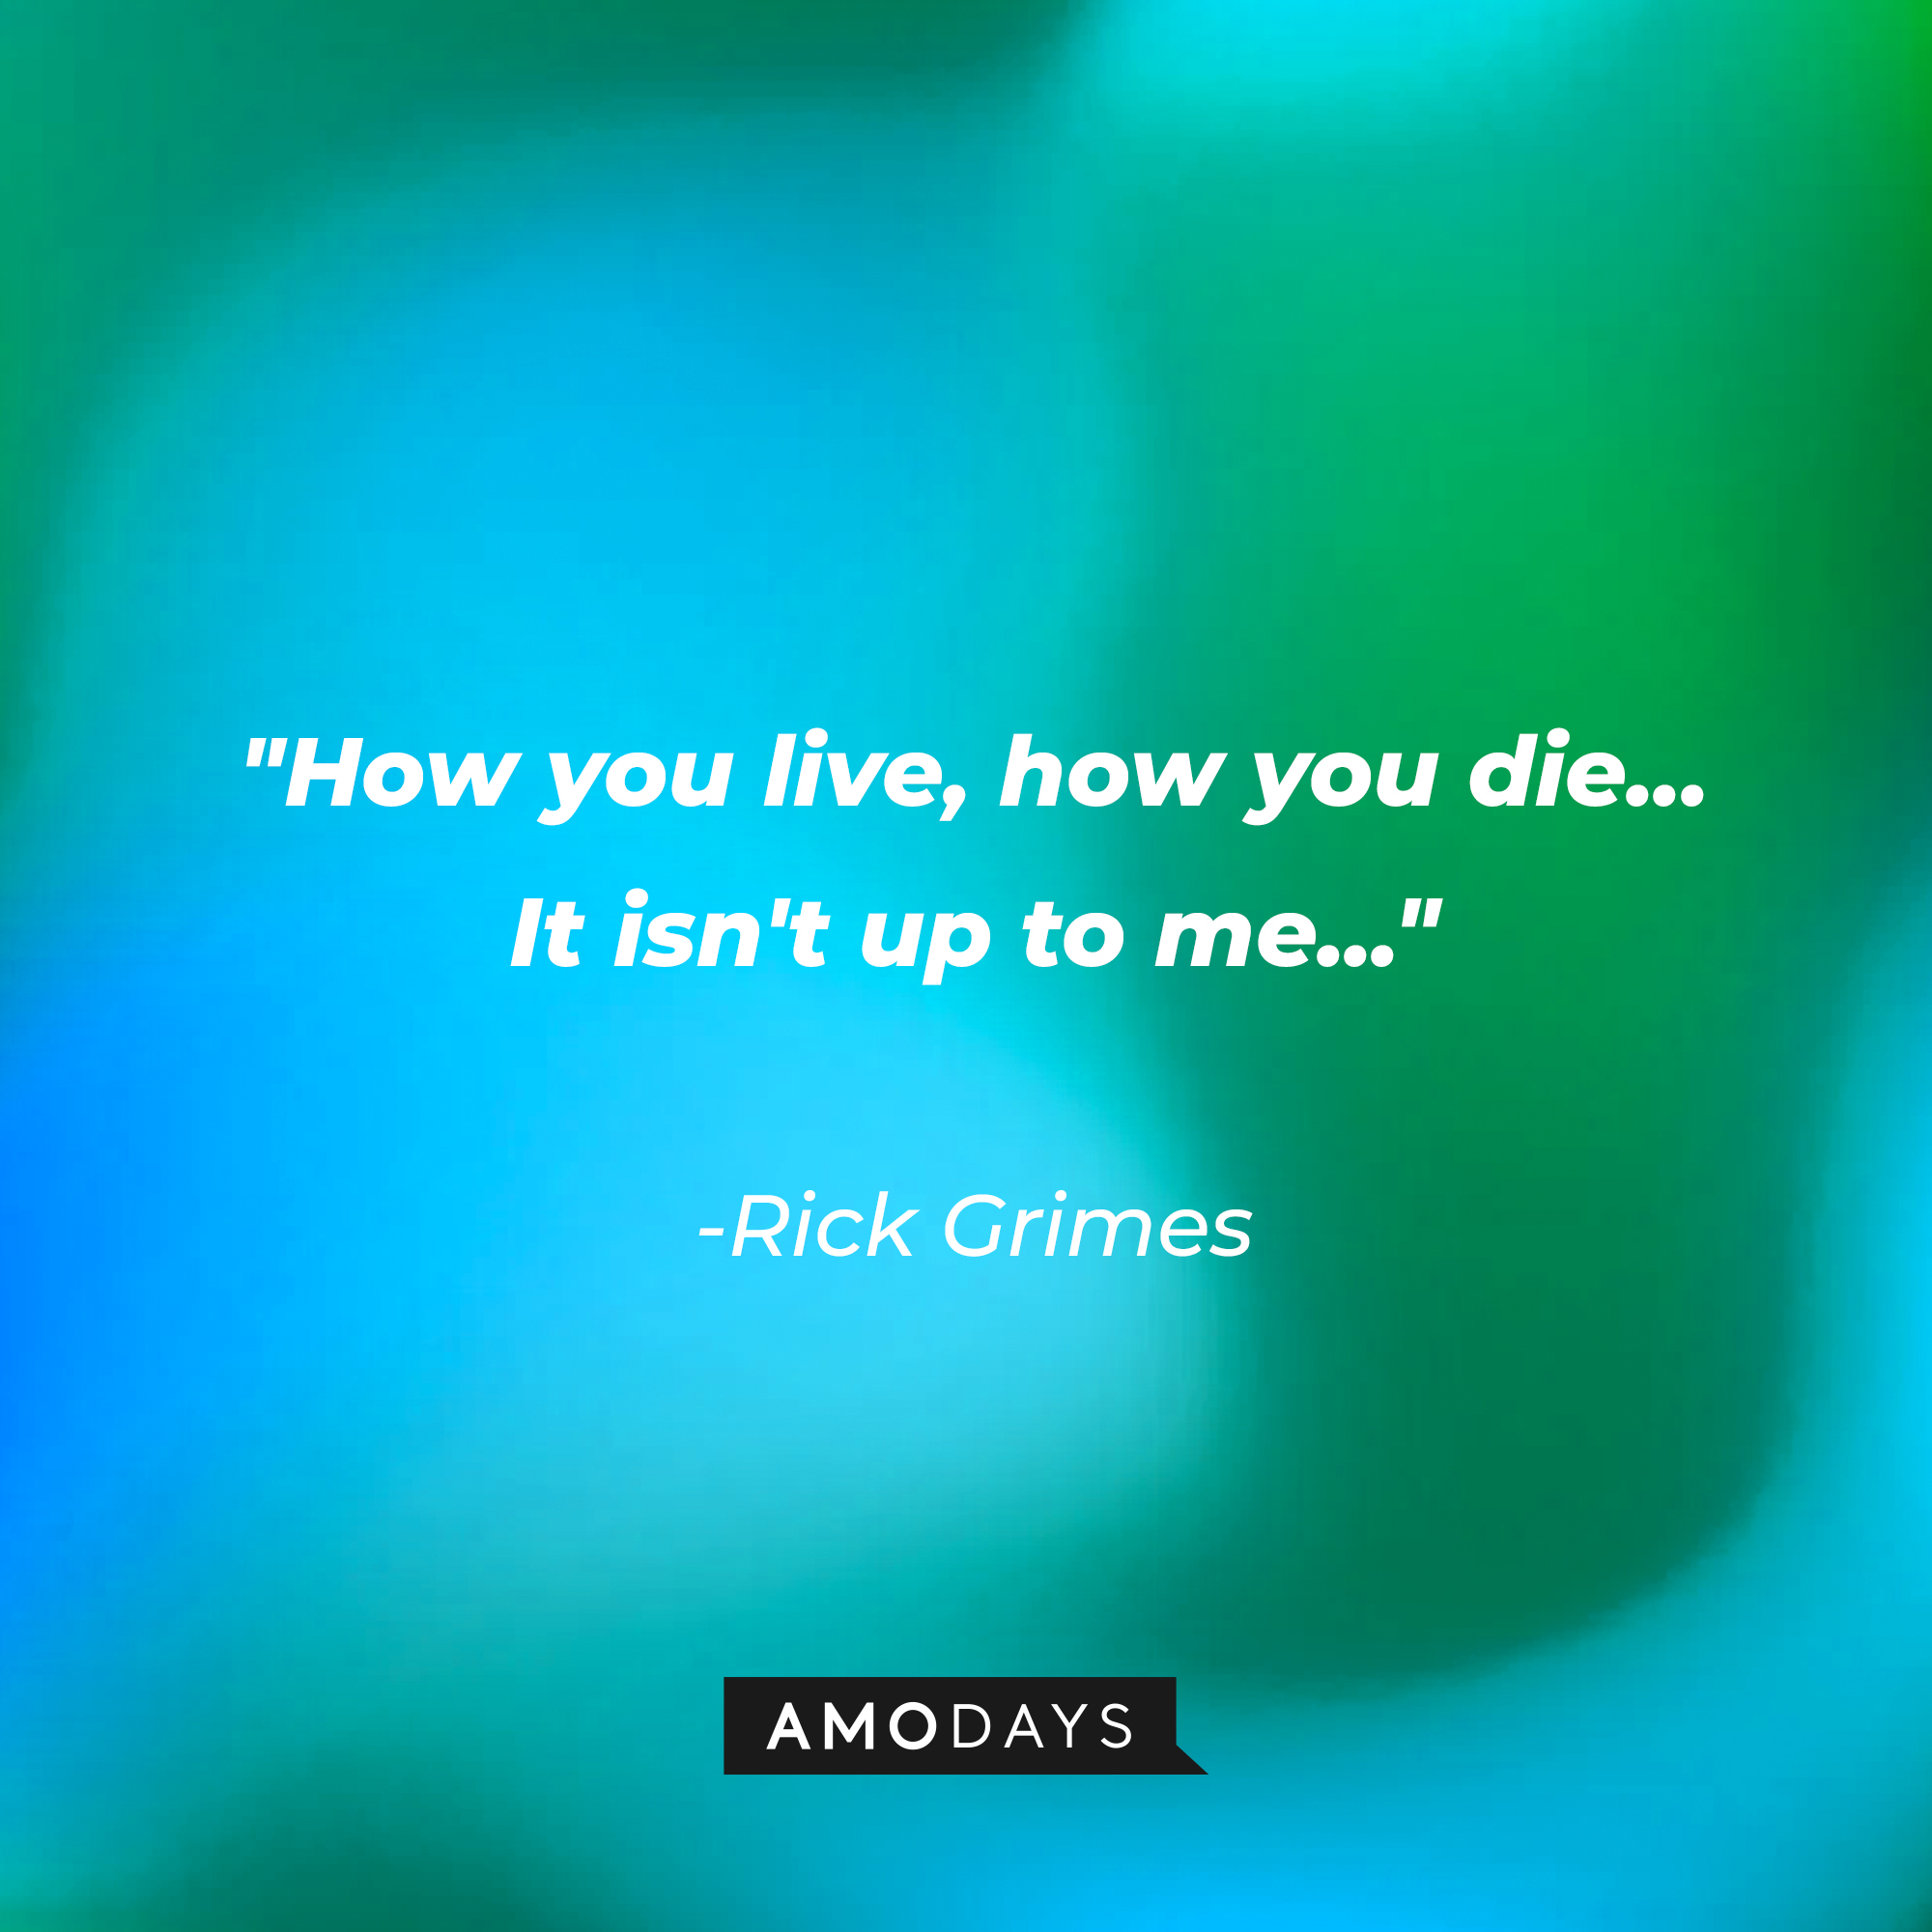 Rick Grimes' quote: "How you live, how you die... It isn't up to me..." | Source: AmoDays